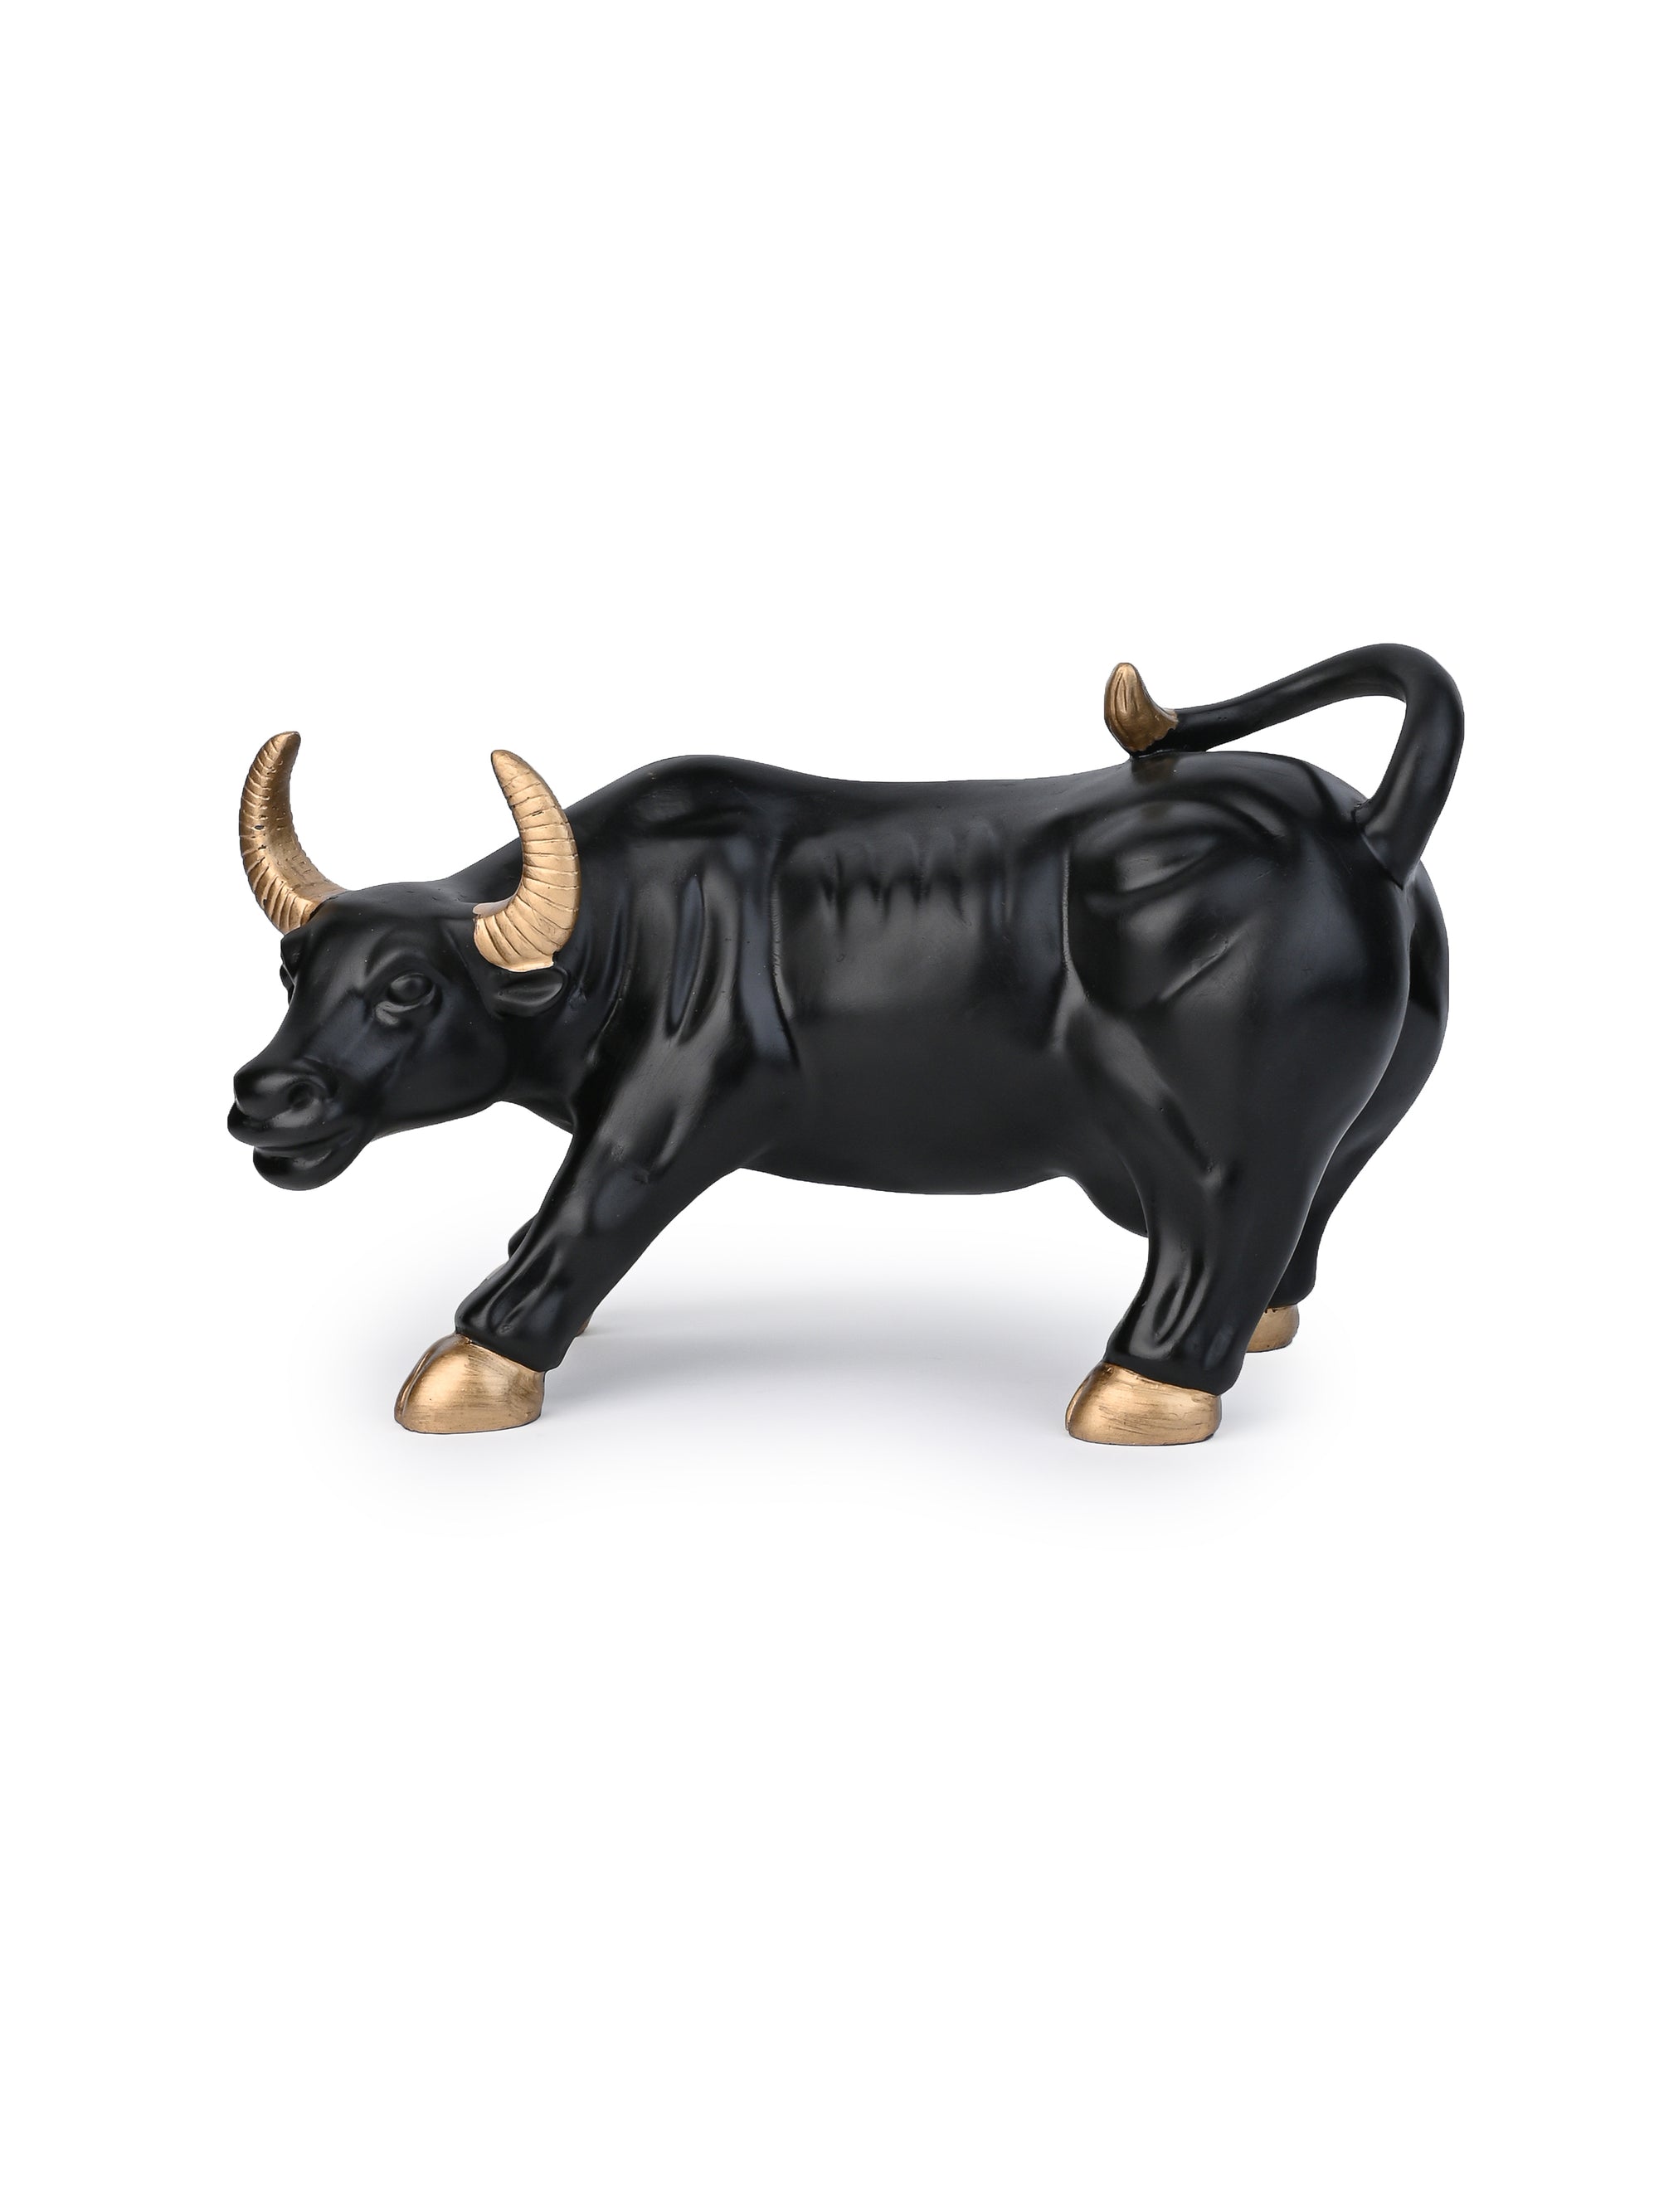 Resin Crafted Charging Black Bull Home Decor Showpiece - 12 inches